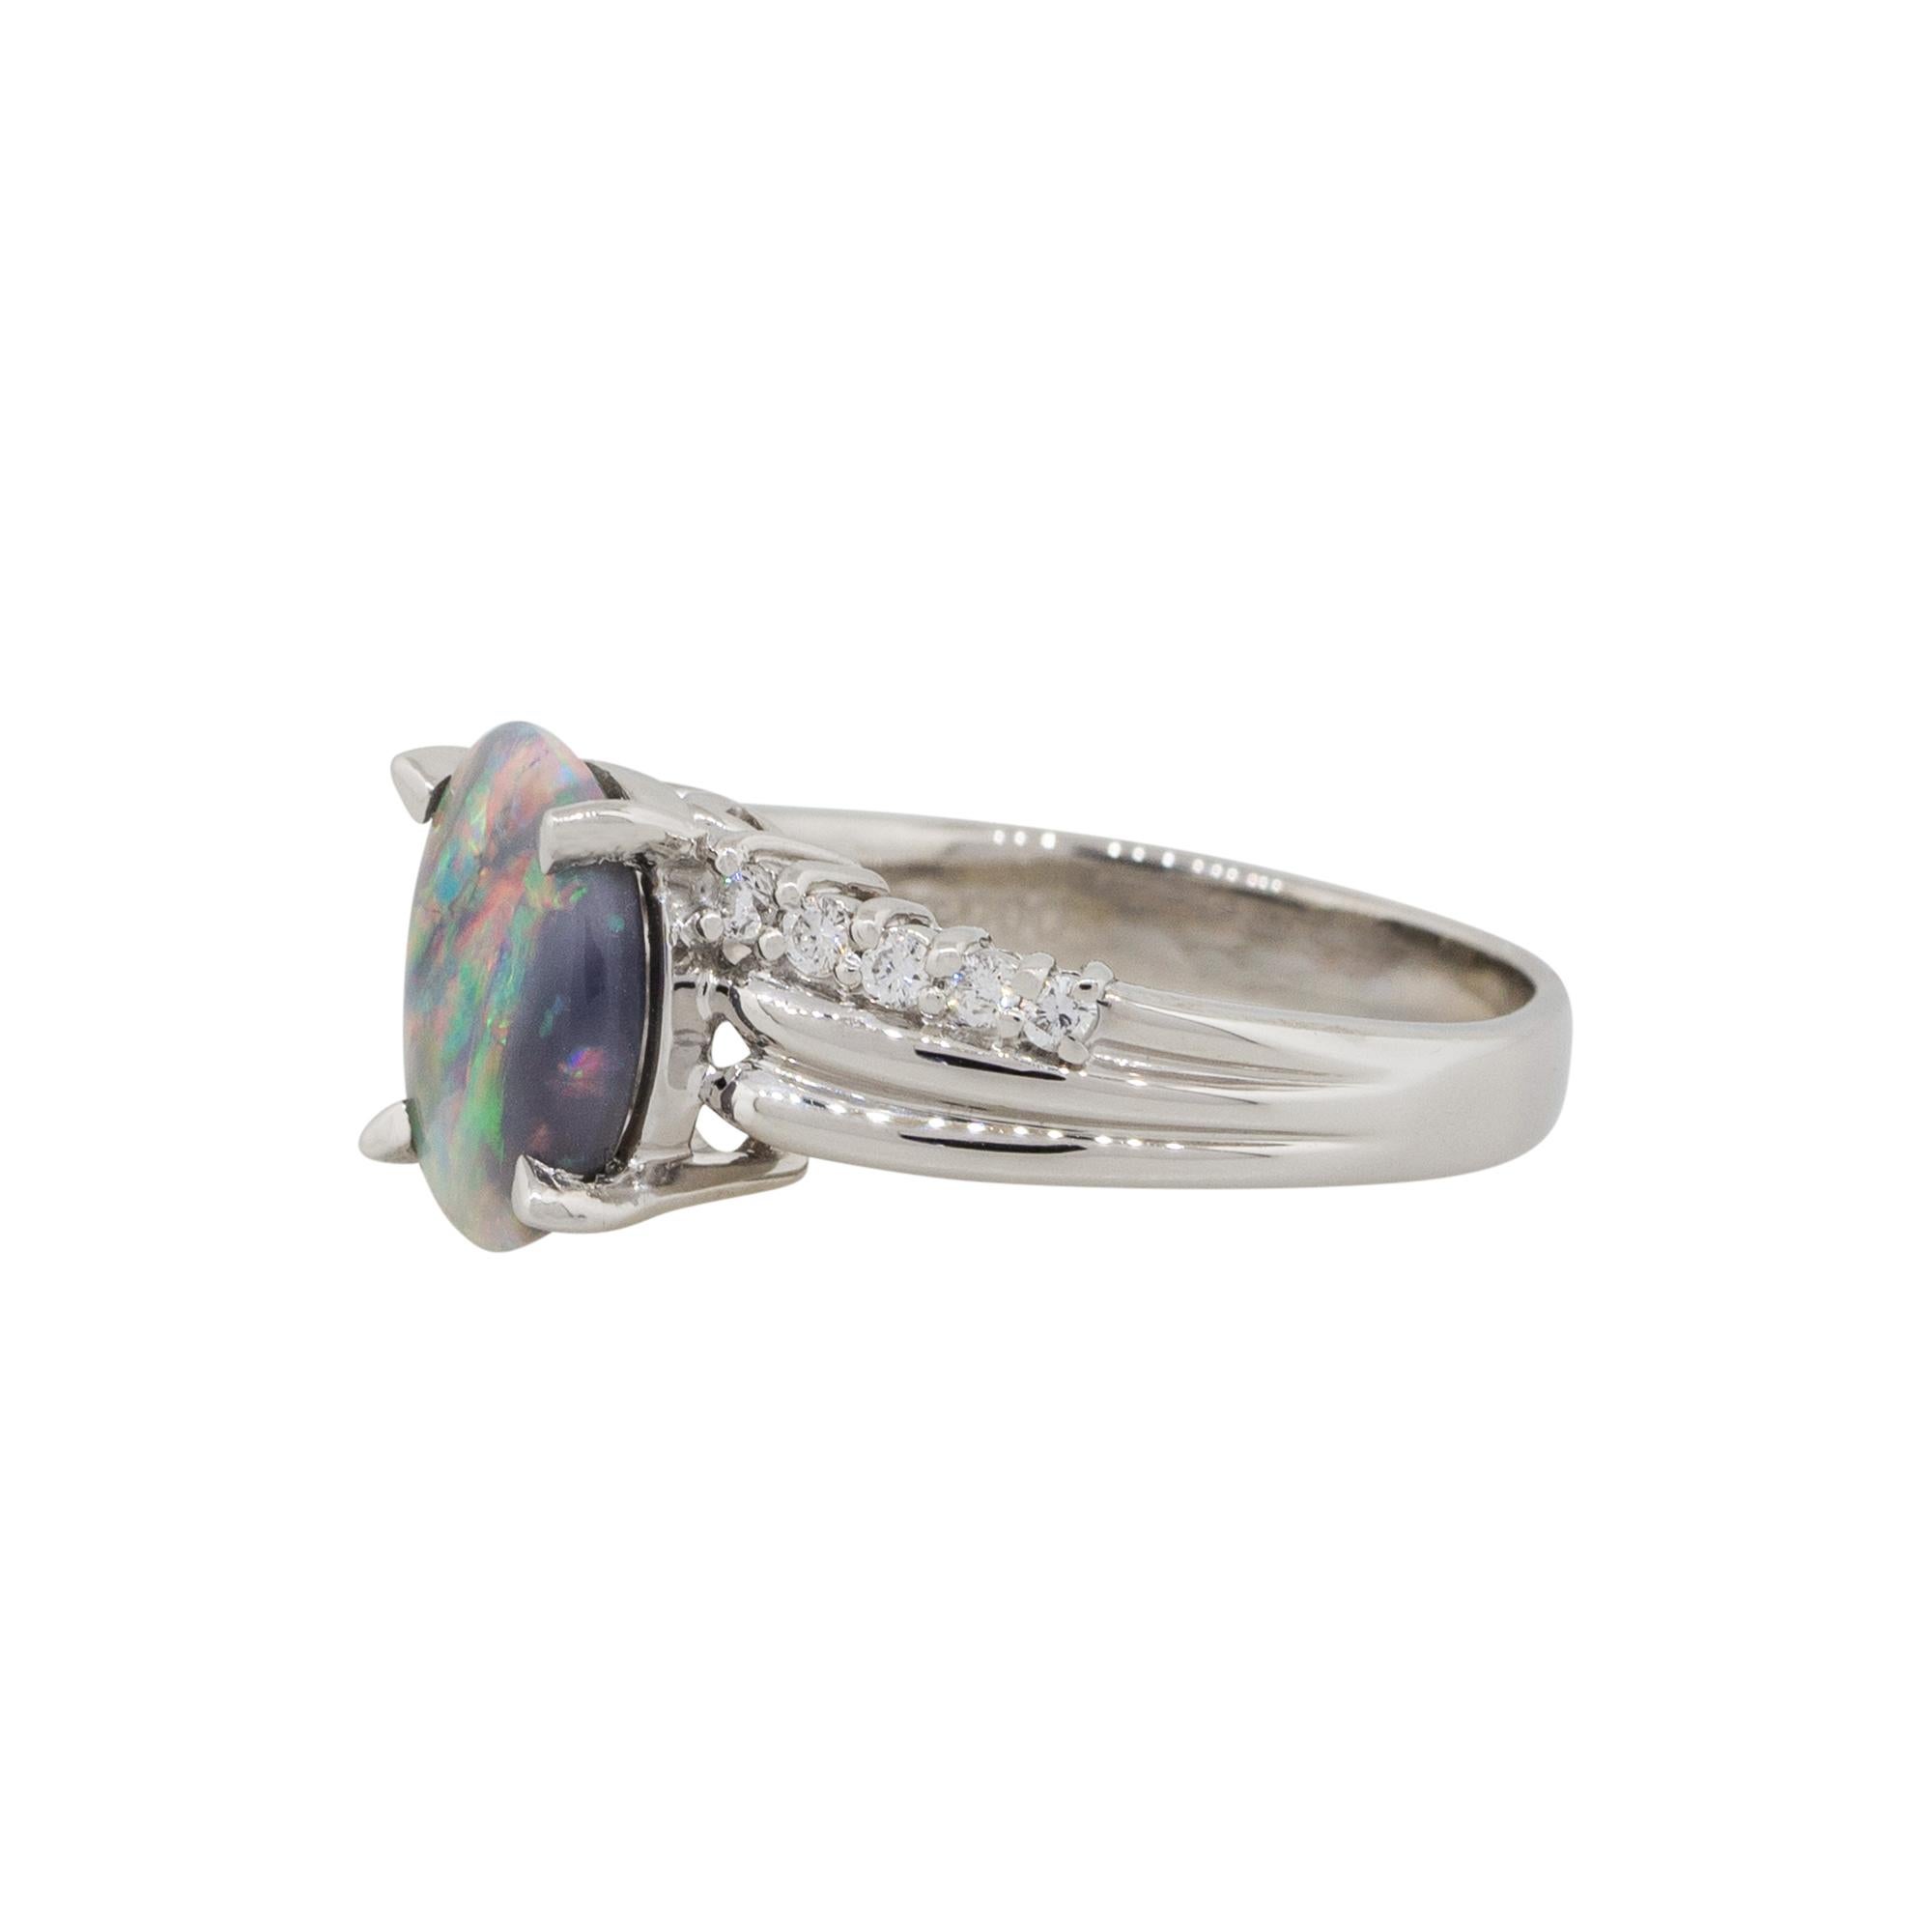 Material: Platinum
Gemstone details: Black oval shape Opal gemstone 
Diamond details: Approx. 0.16ctw of round cut diamonds. Diamonds are G/H in color and VS in clarity
Ring Size: 7.25
Ring Measurements: 0.80